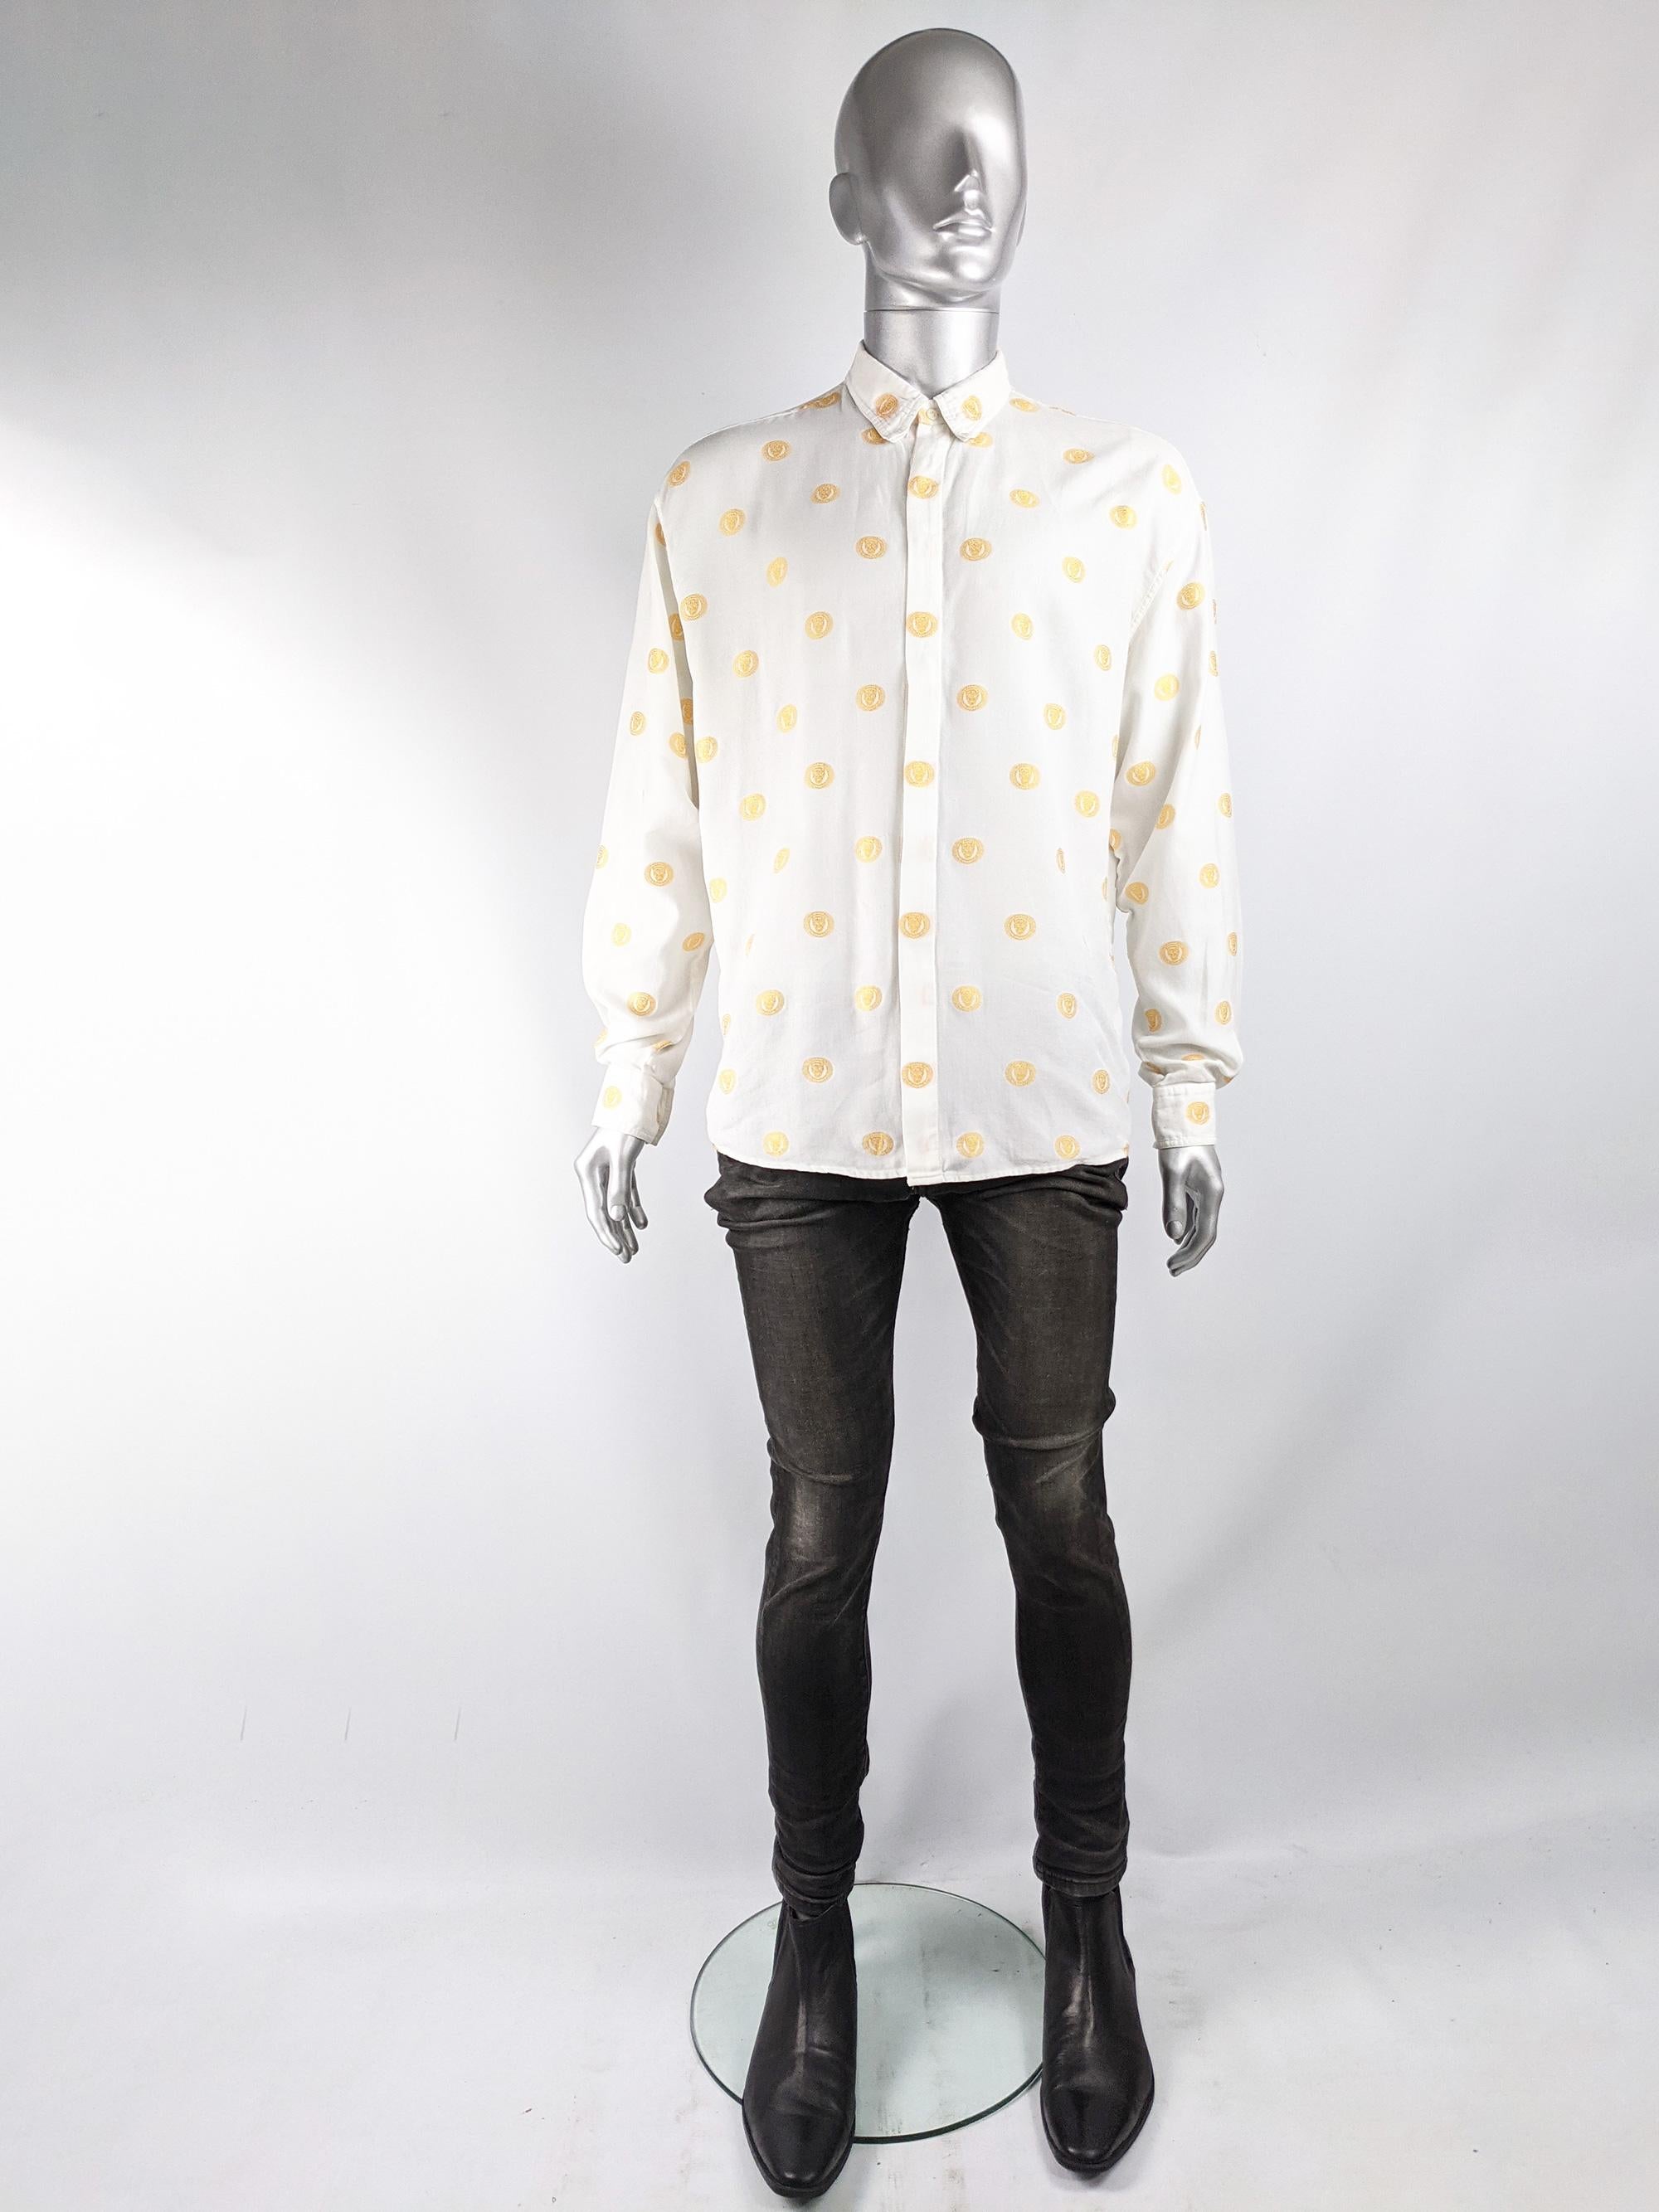 A stylish and rare vintage mens long sleeve button down shirt from the 90s by Gianni Versace for the Istante line (Versaces secondary line, which he designed himself, more expensive at the time than Donatella's Versus line). In a white cotton blend